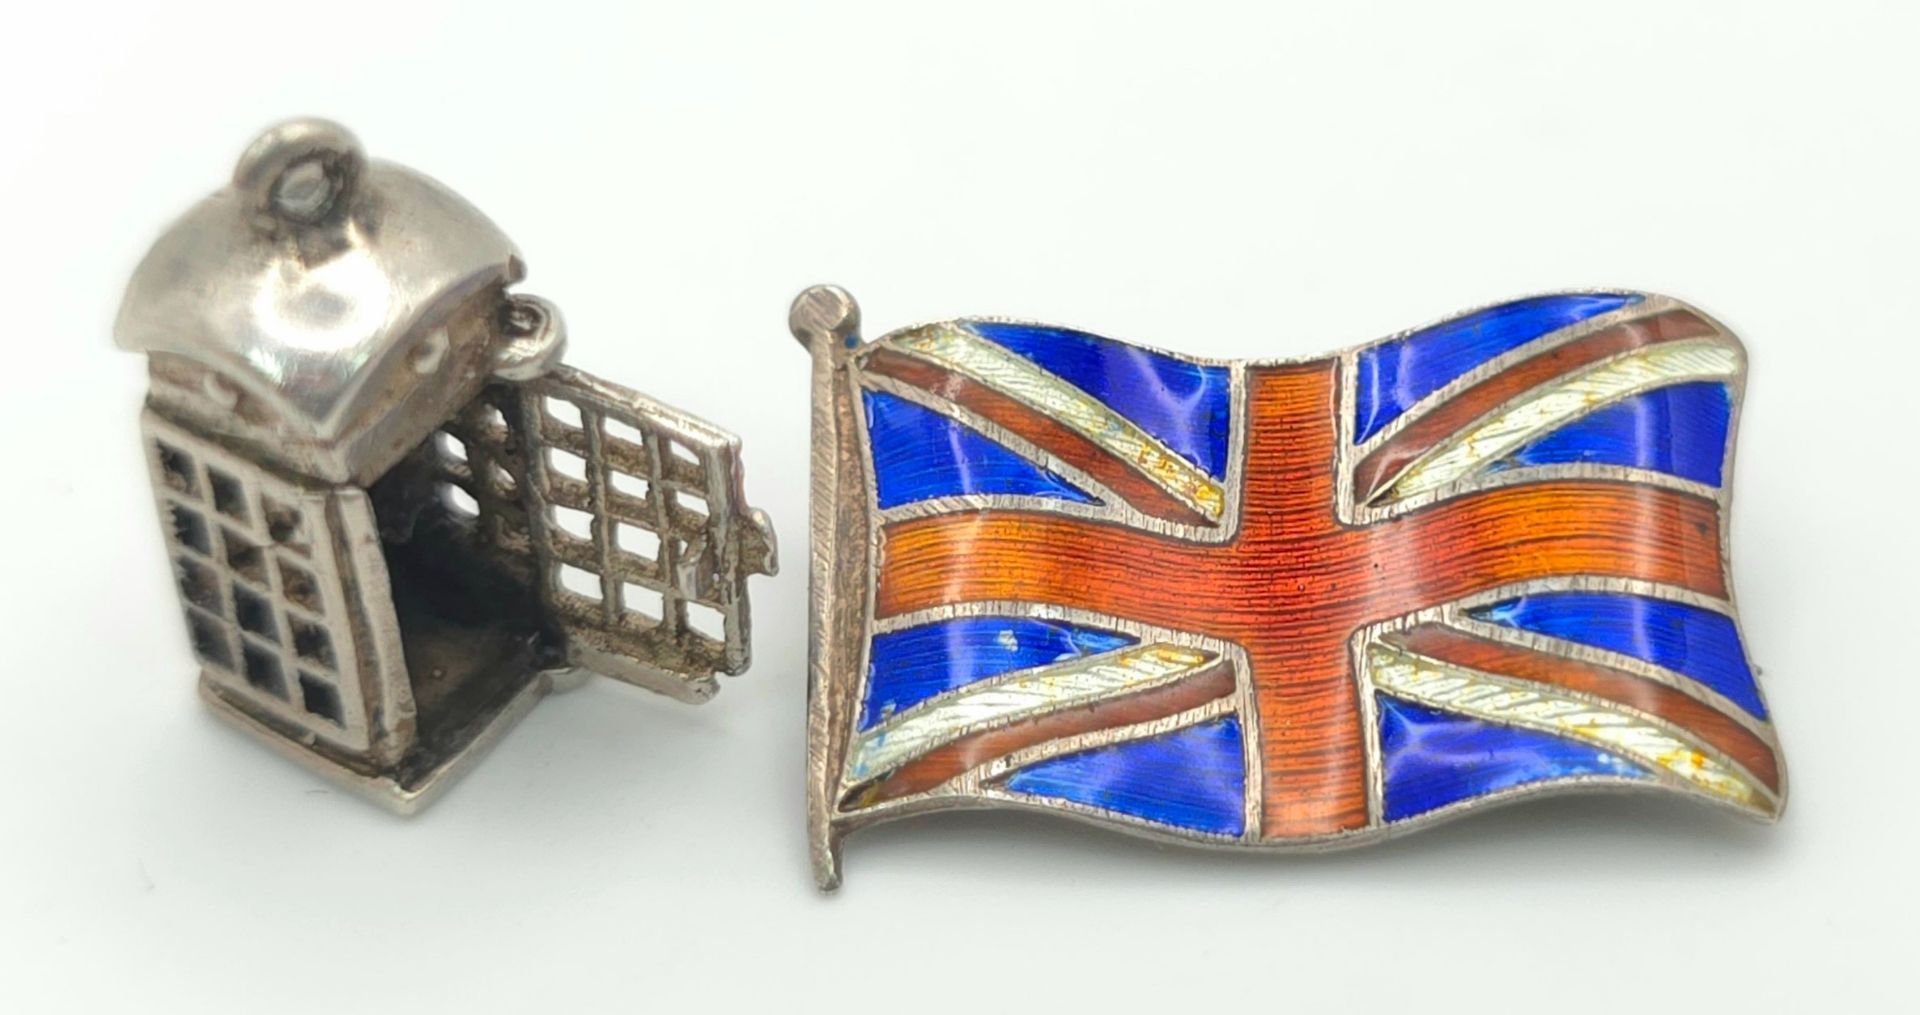 A STERLING SILVER LONDON THEMED COLLECTION OF ITEMS - UNION JACK FLAG BROOCH, CUP OF TEA CHARM, - Image 2 of 5